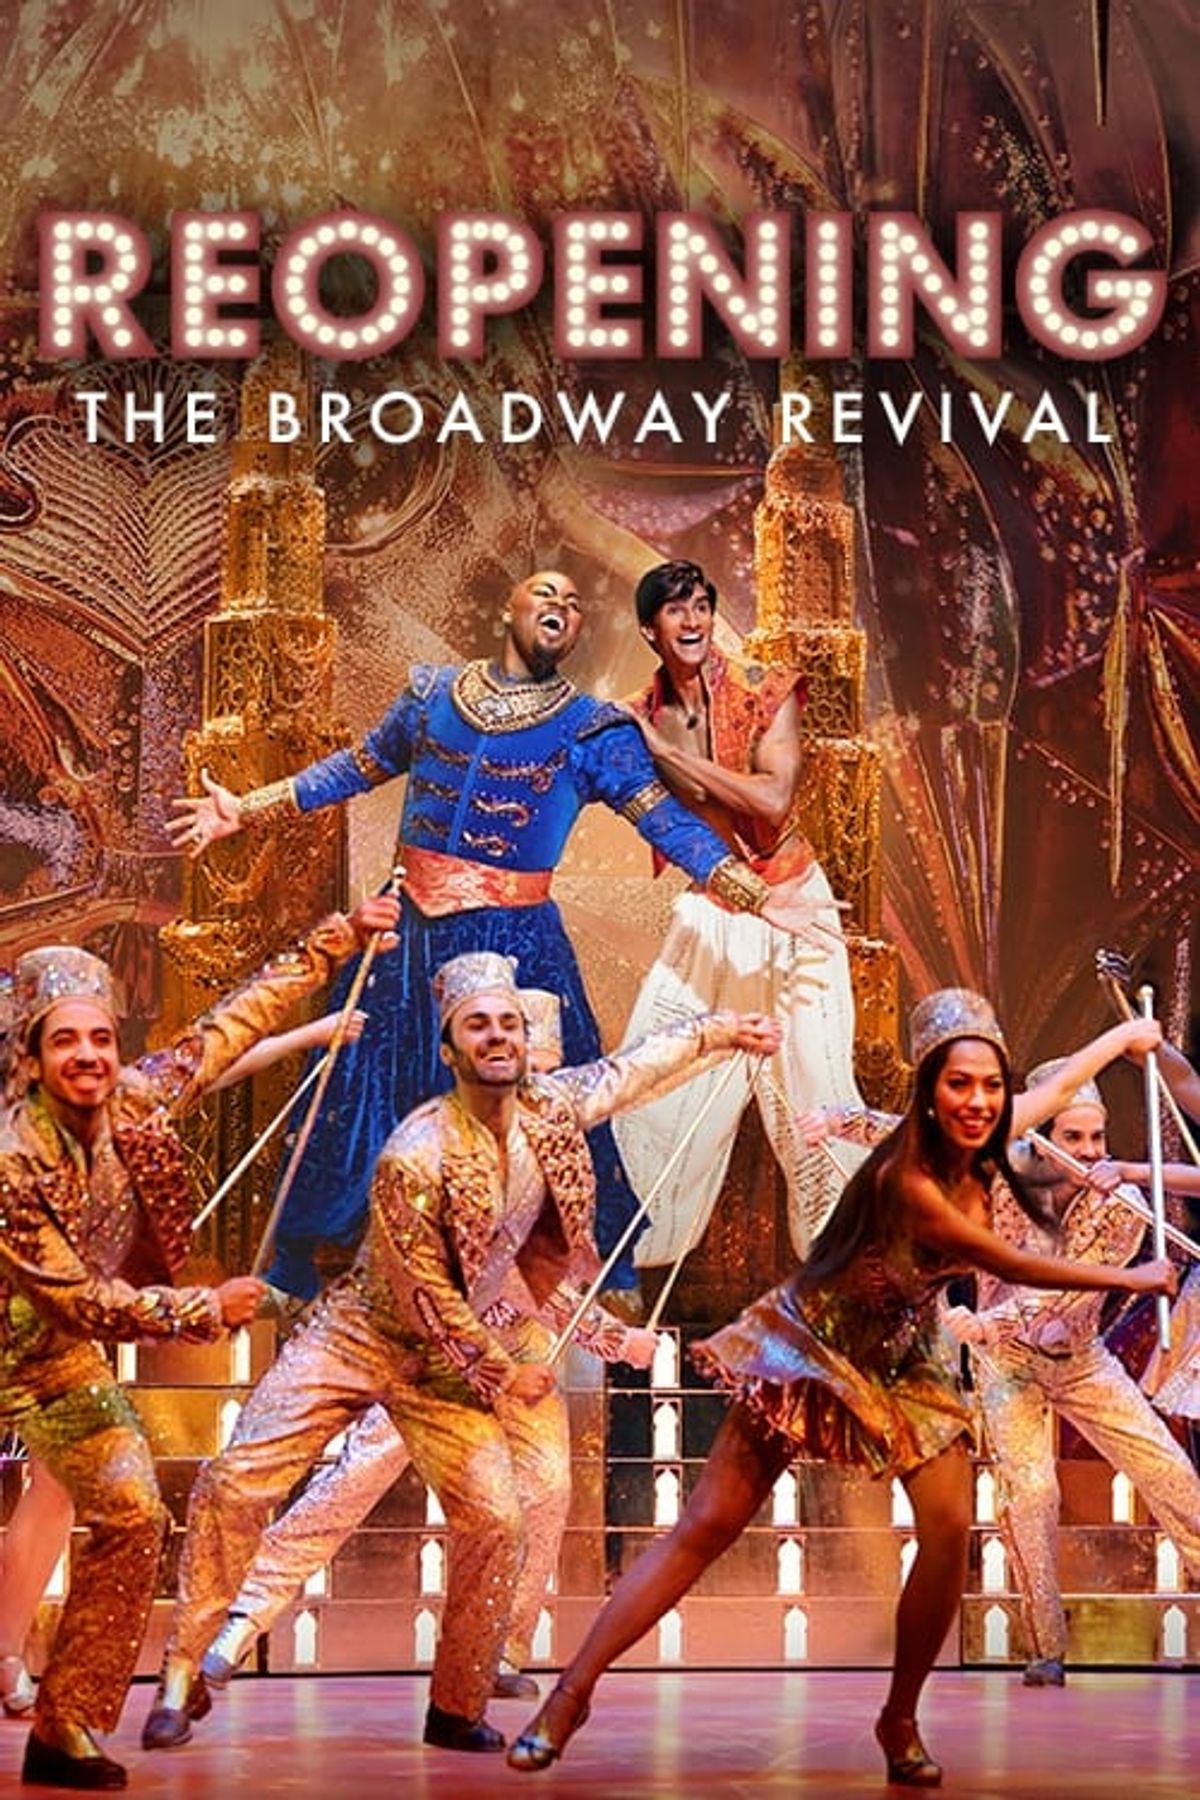 Is “Reopening The Broadway Revival” on PBS